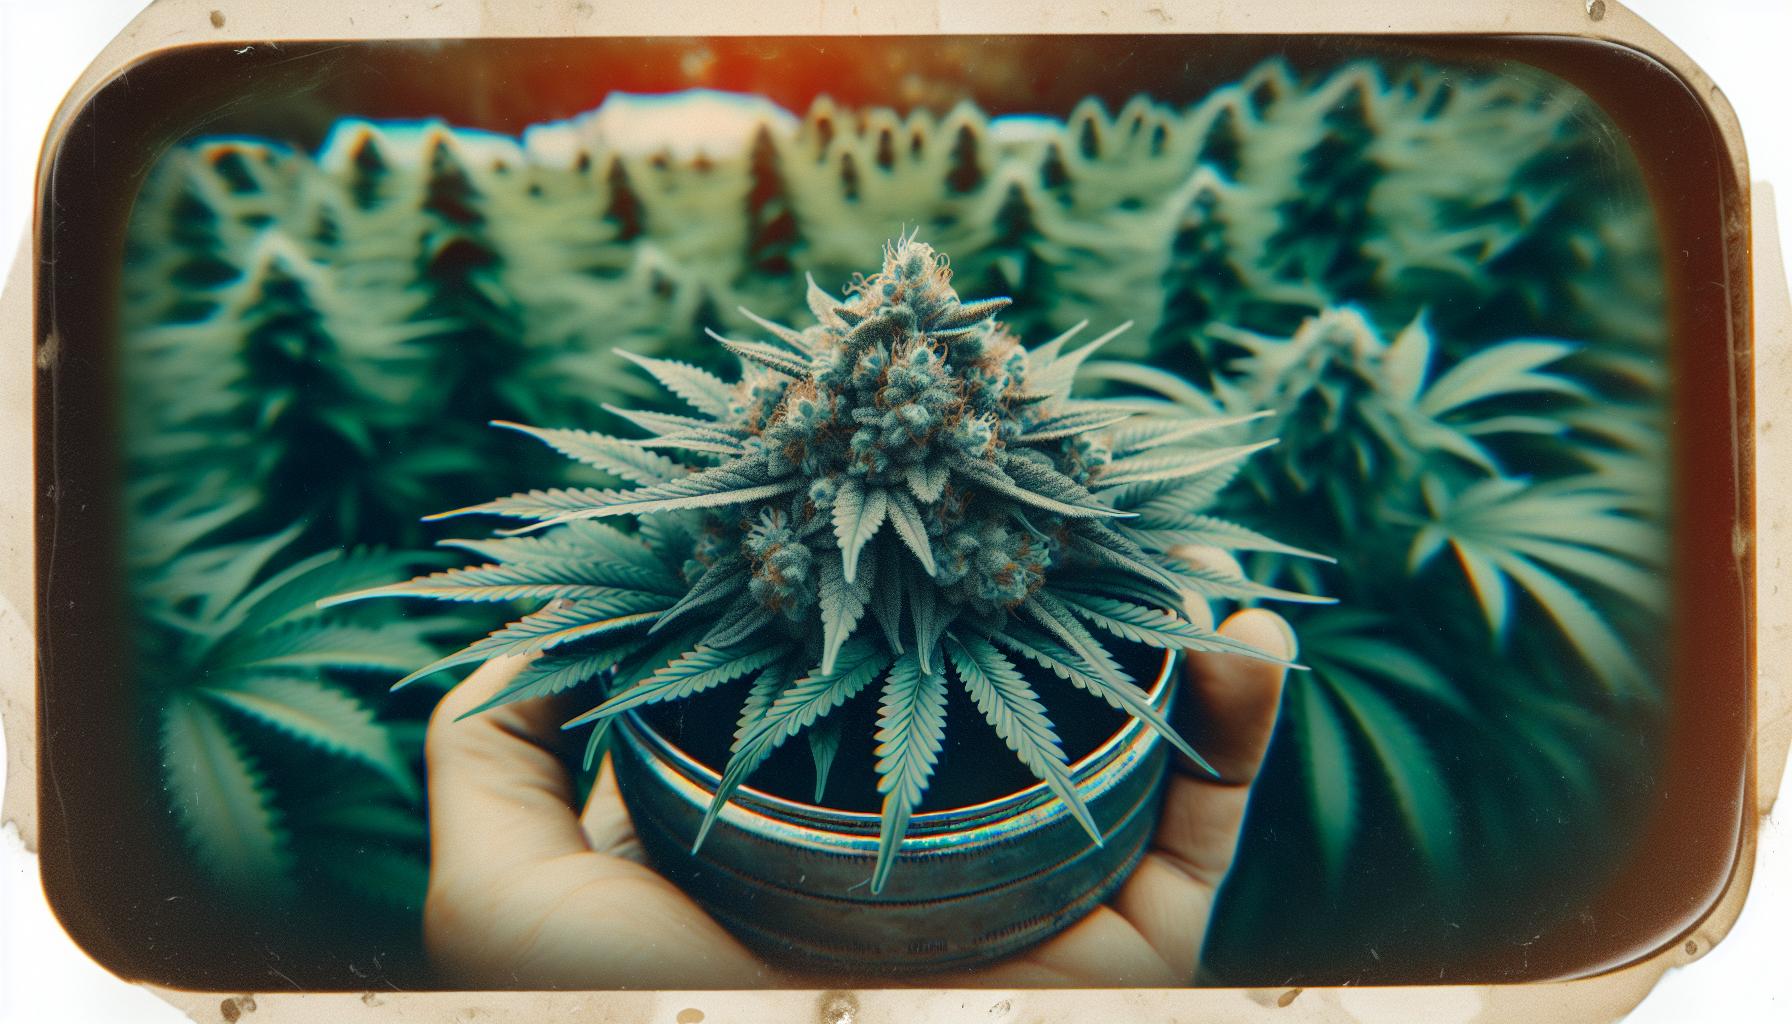 Grow top cannabis strain like a pro in Thailand | News by Thaiger